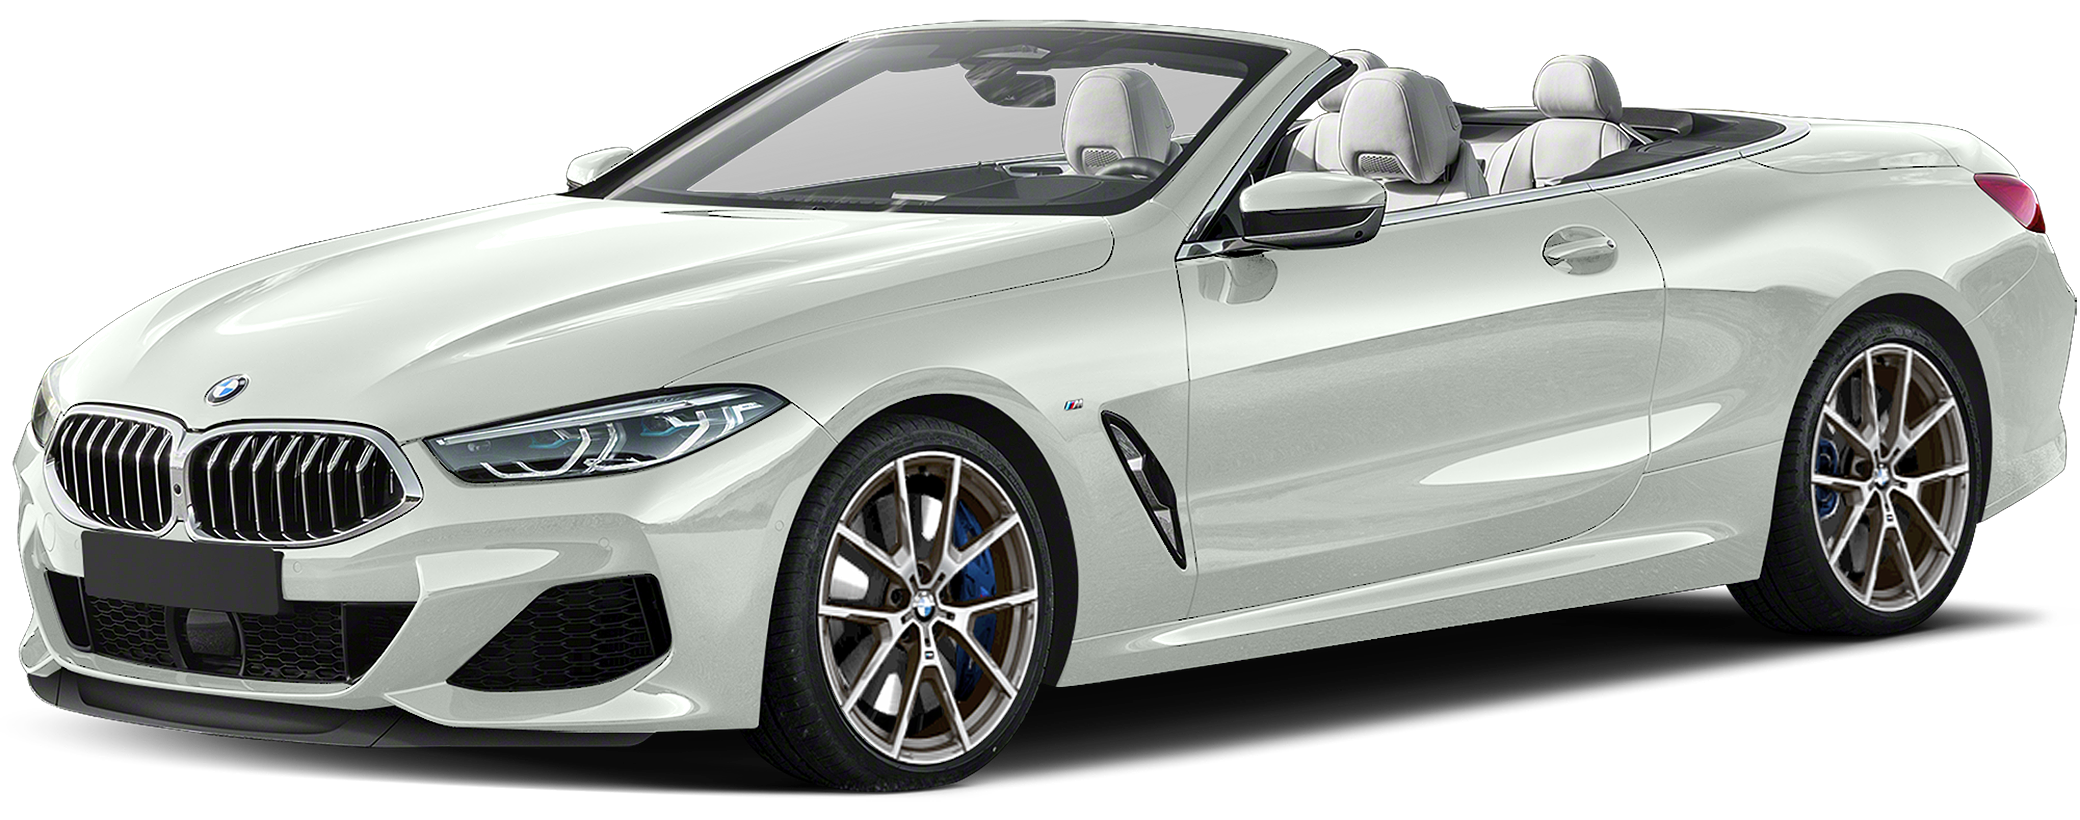 2019 BMW M850i Incentives, Specials & Offers in Freehold NJ